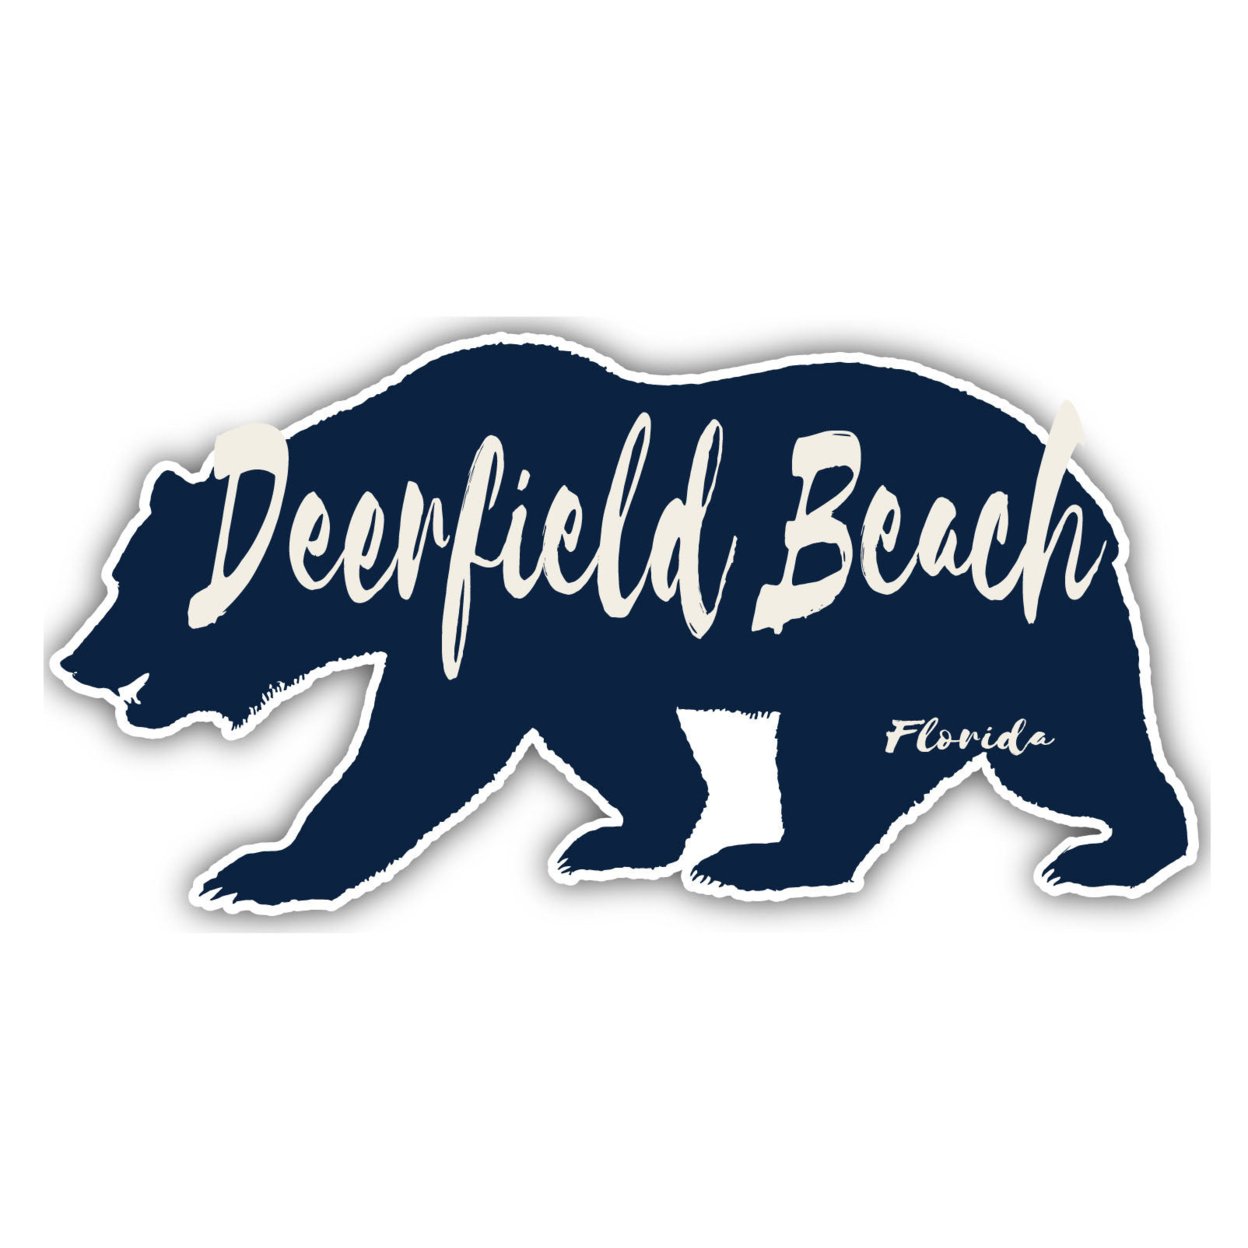 Deerfield Beach Florida Souvenir Decorative Stickers (Choose Theme And Size) - Single Unit, 8-Inch, Great Outdoors